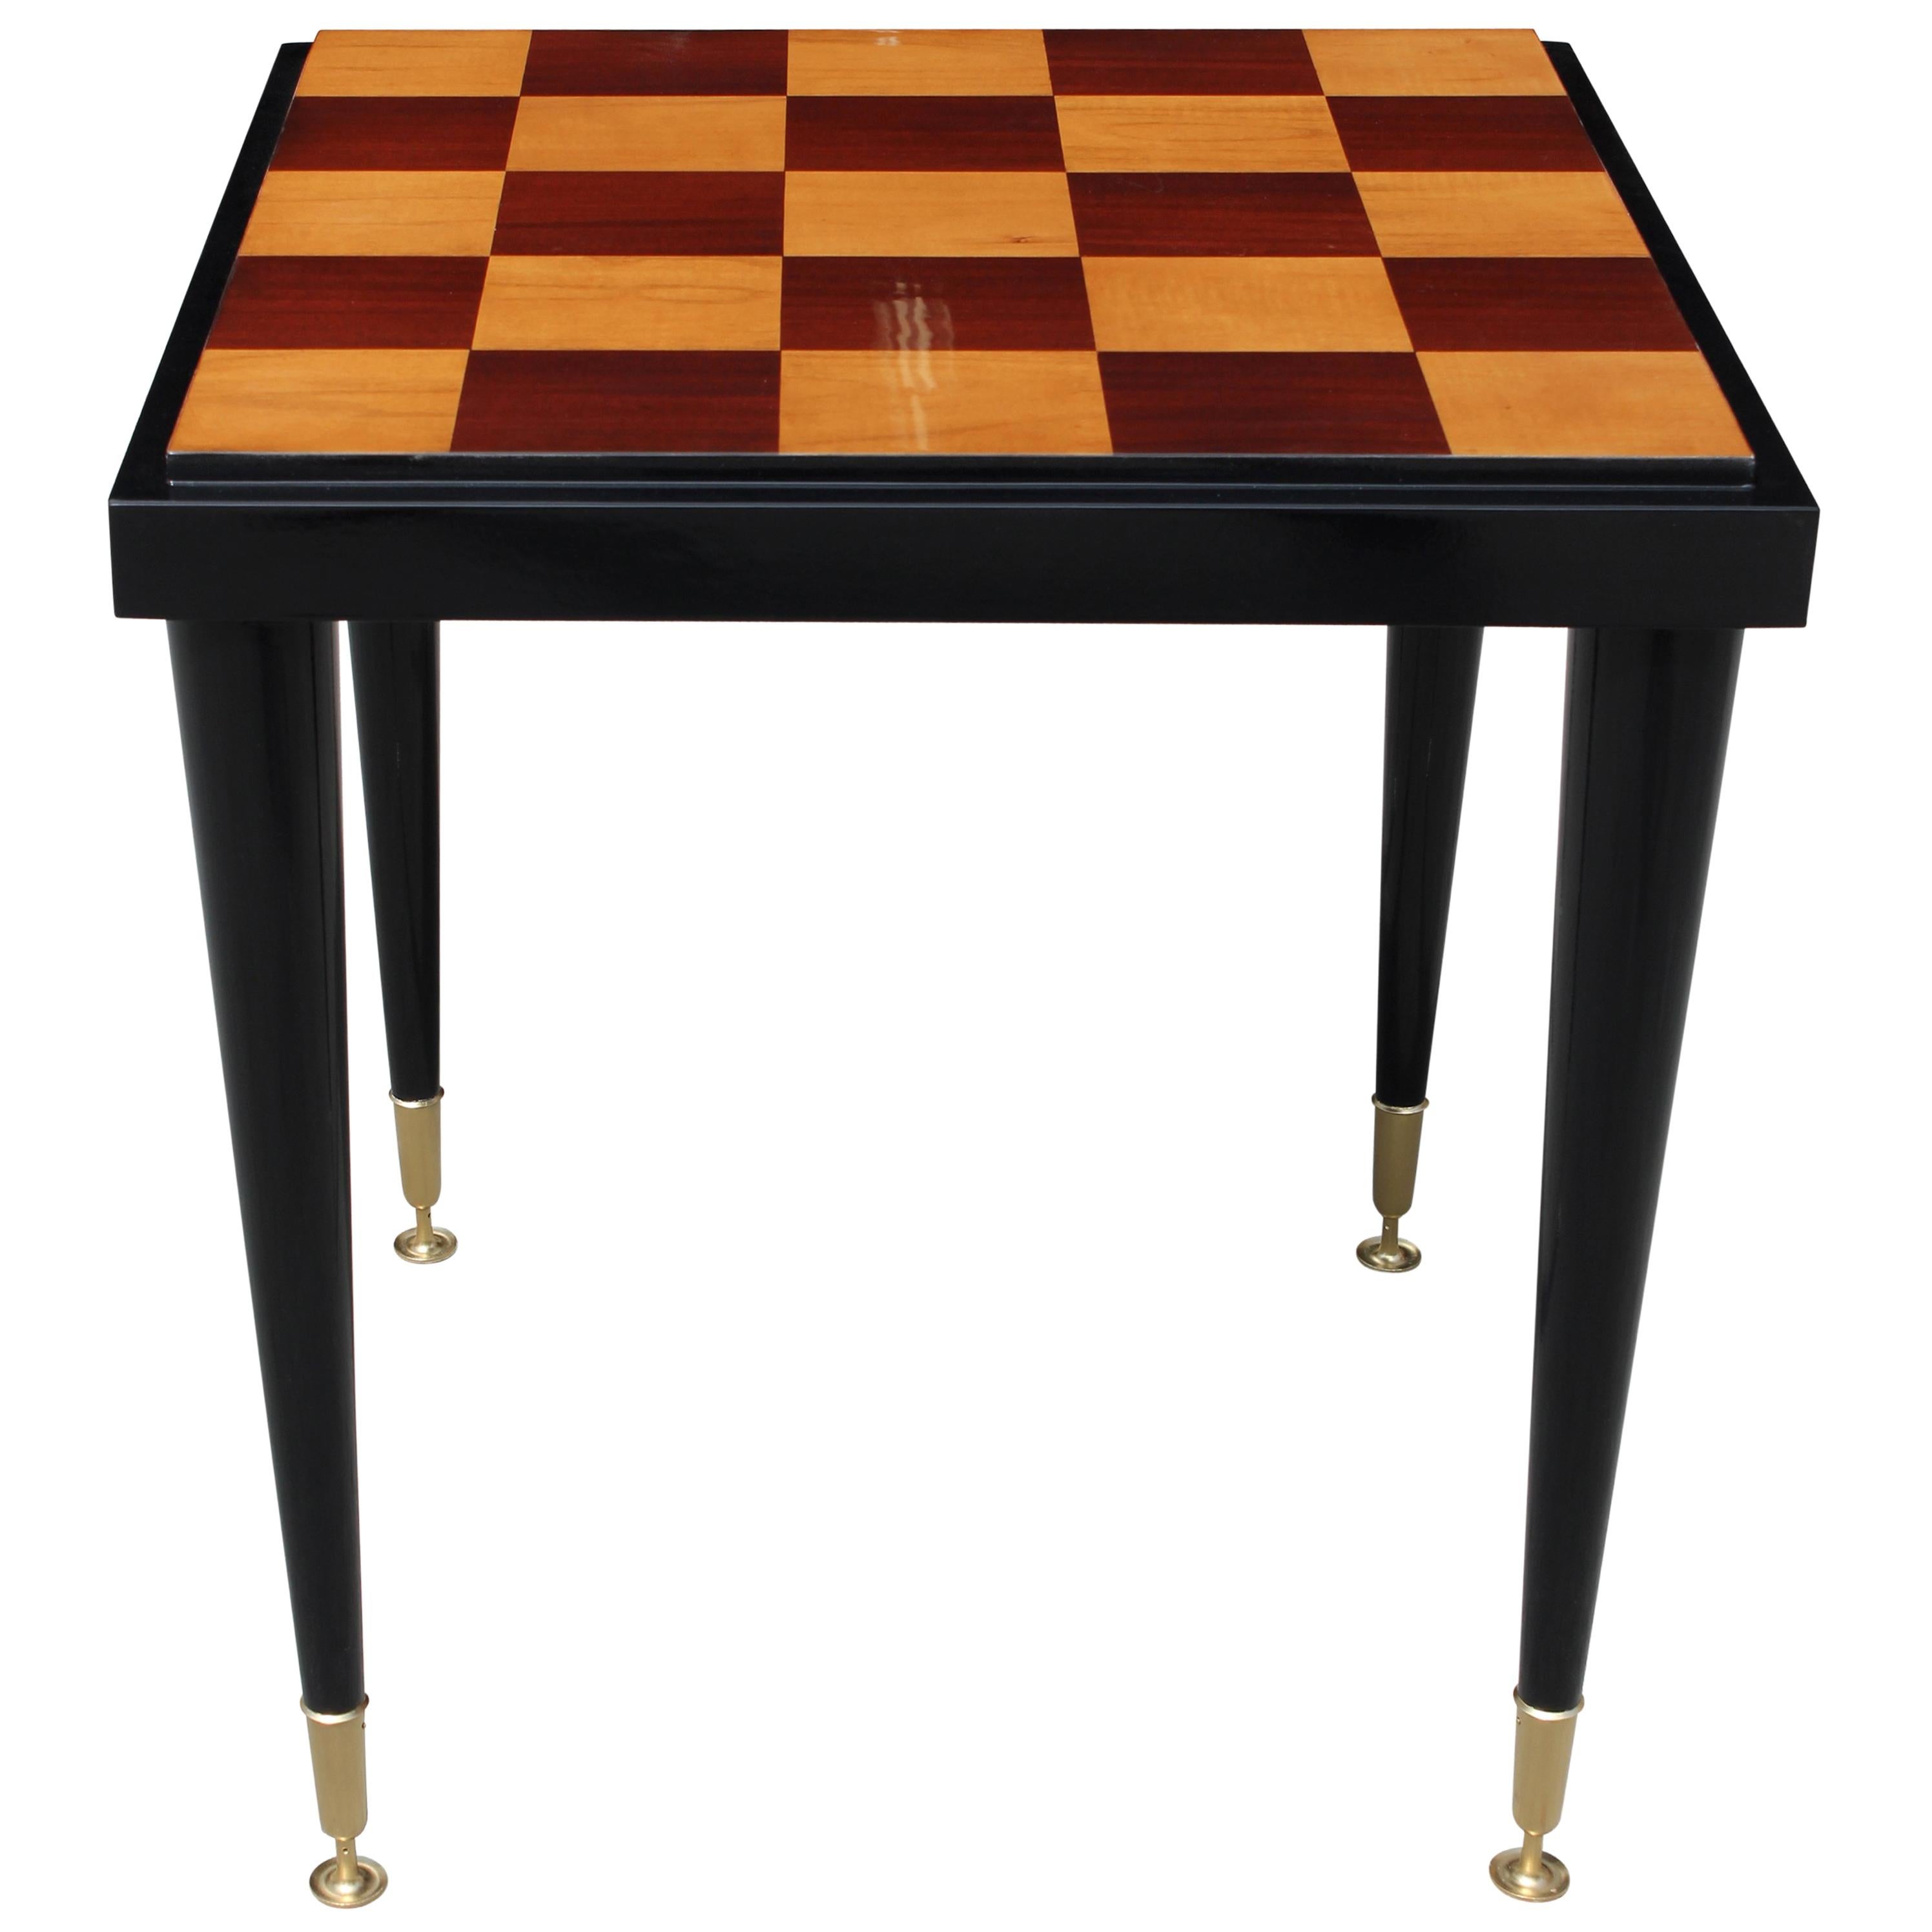 Stunning French Art Deco Ebony and Sycamore Center Table or Game Table